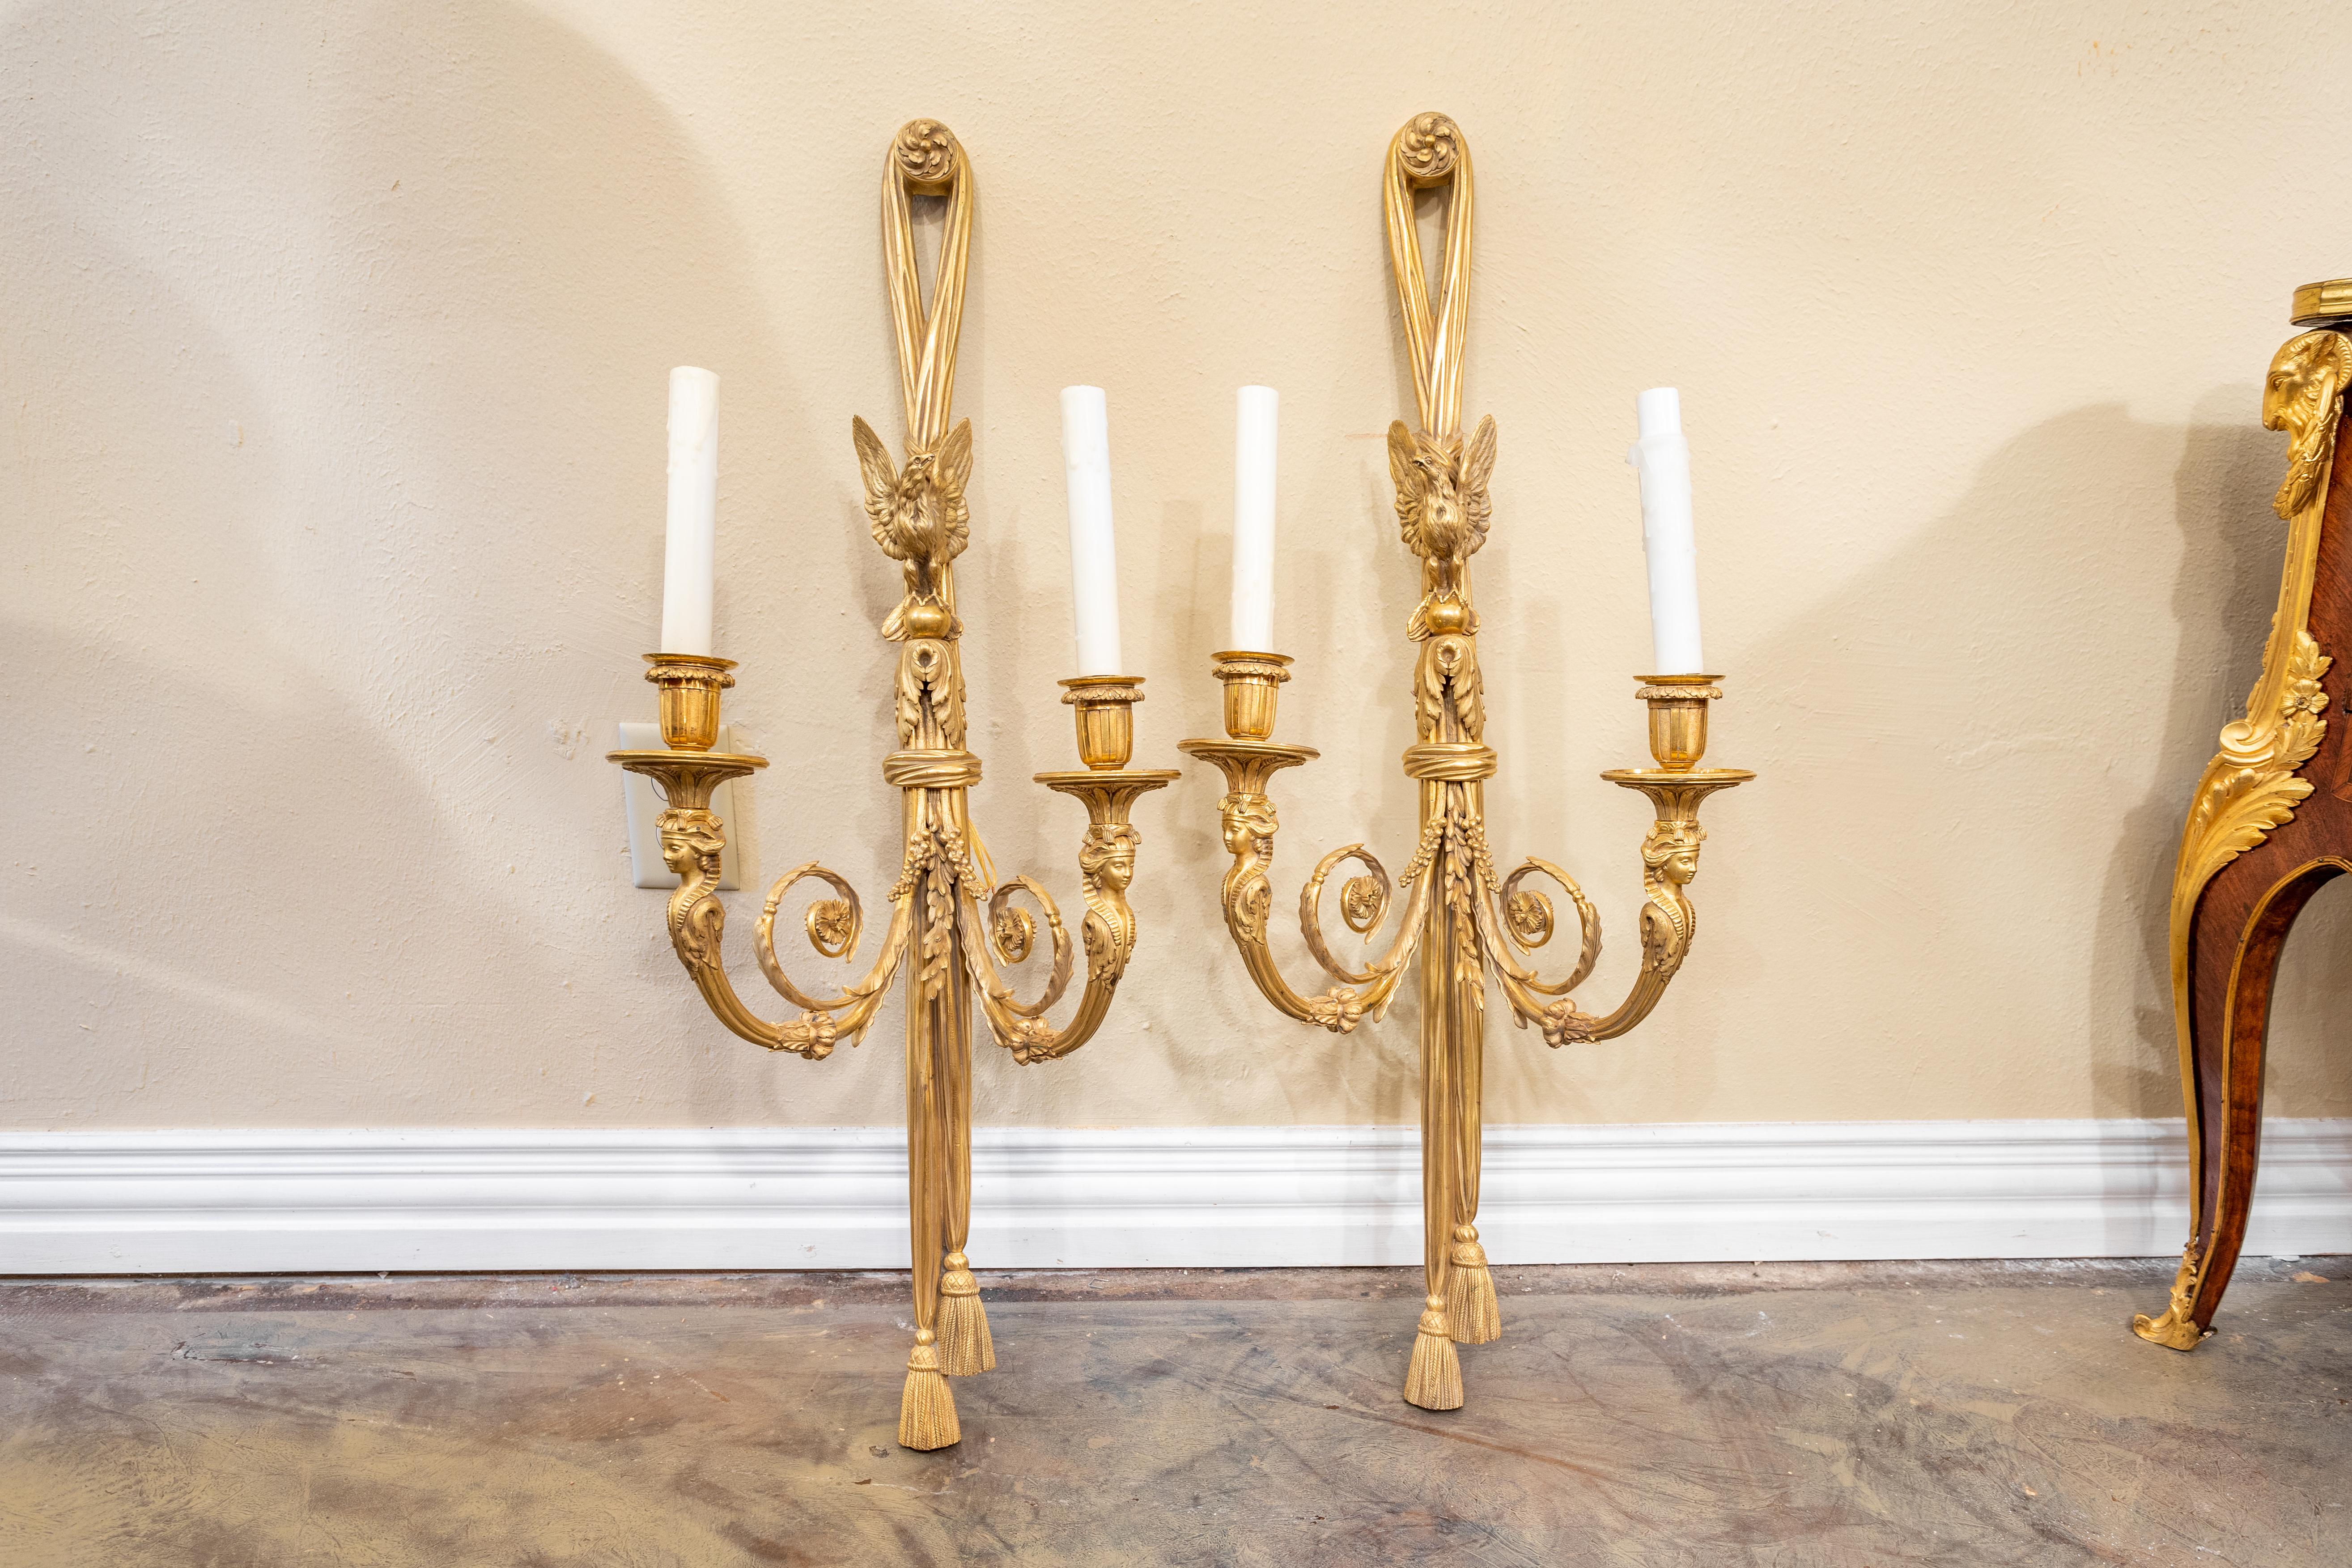 A very fine pair of 19th century French Empire gilt bronze large two light sconces. Fine Egyptian heads below the candles with a finely cast Eagle at the top and tassels at the bottom.